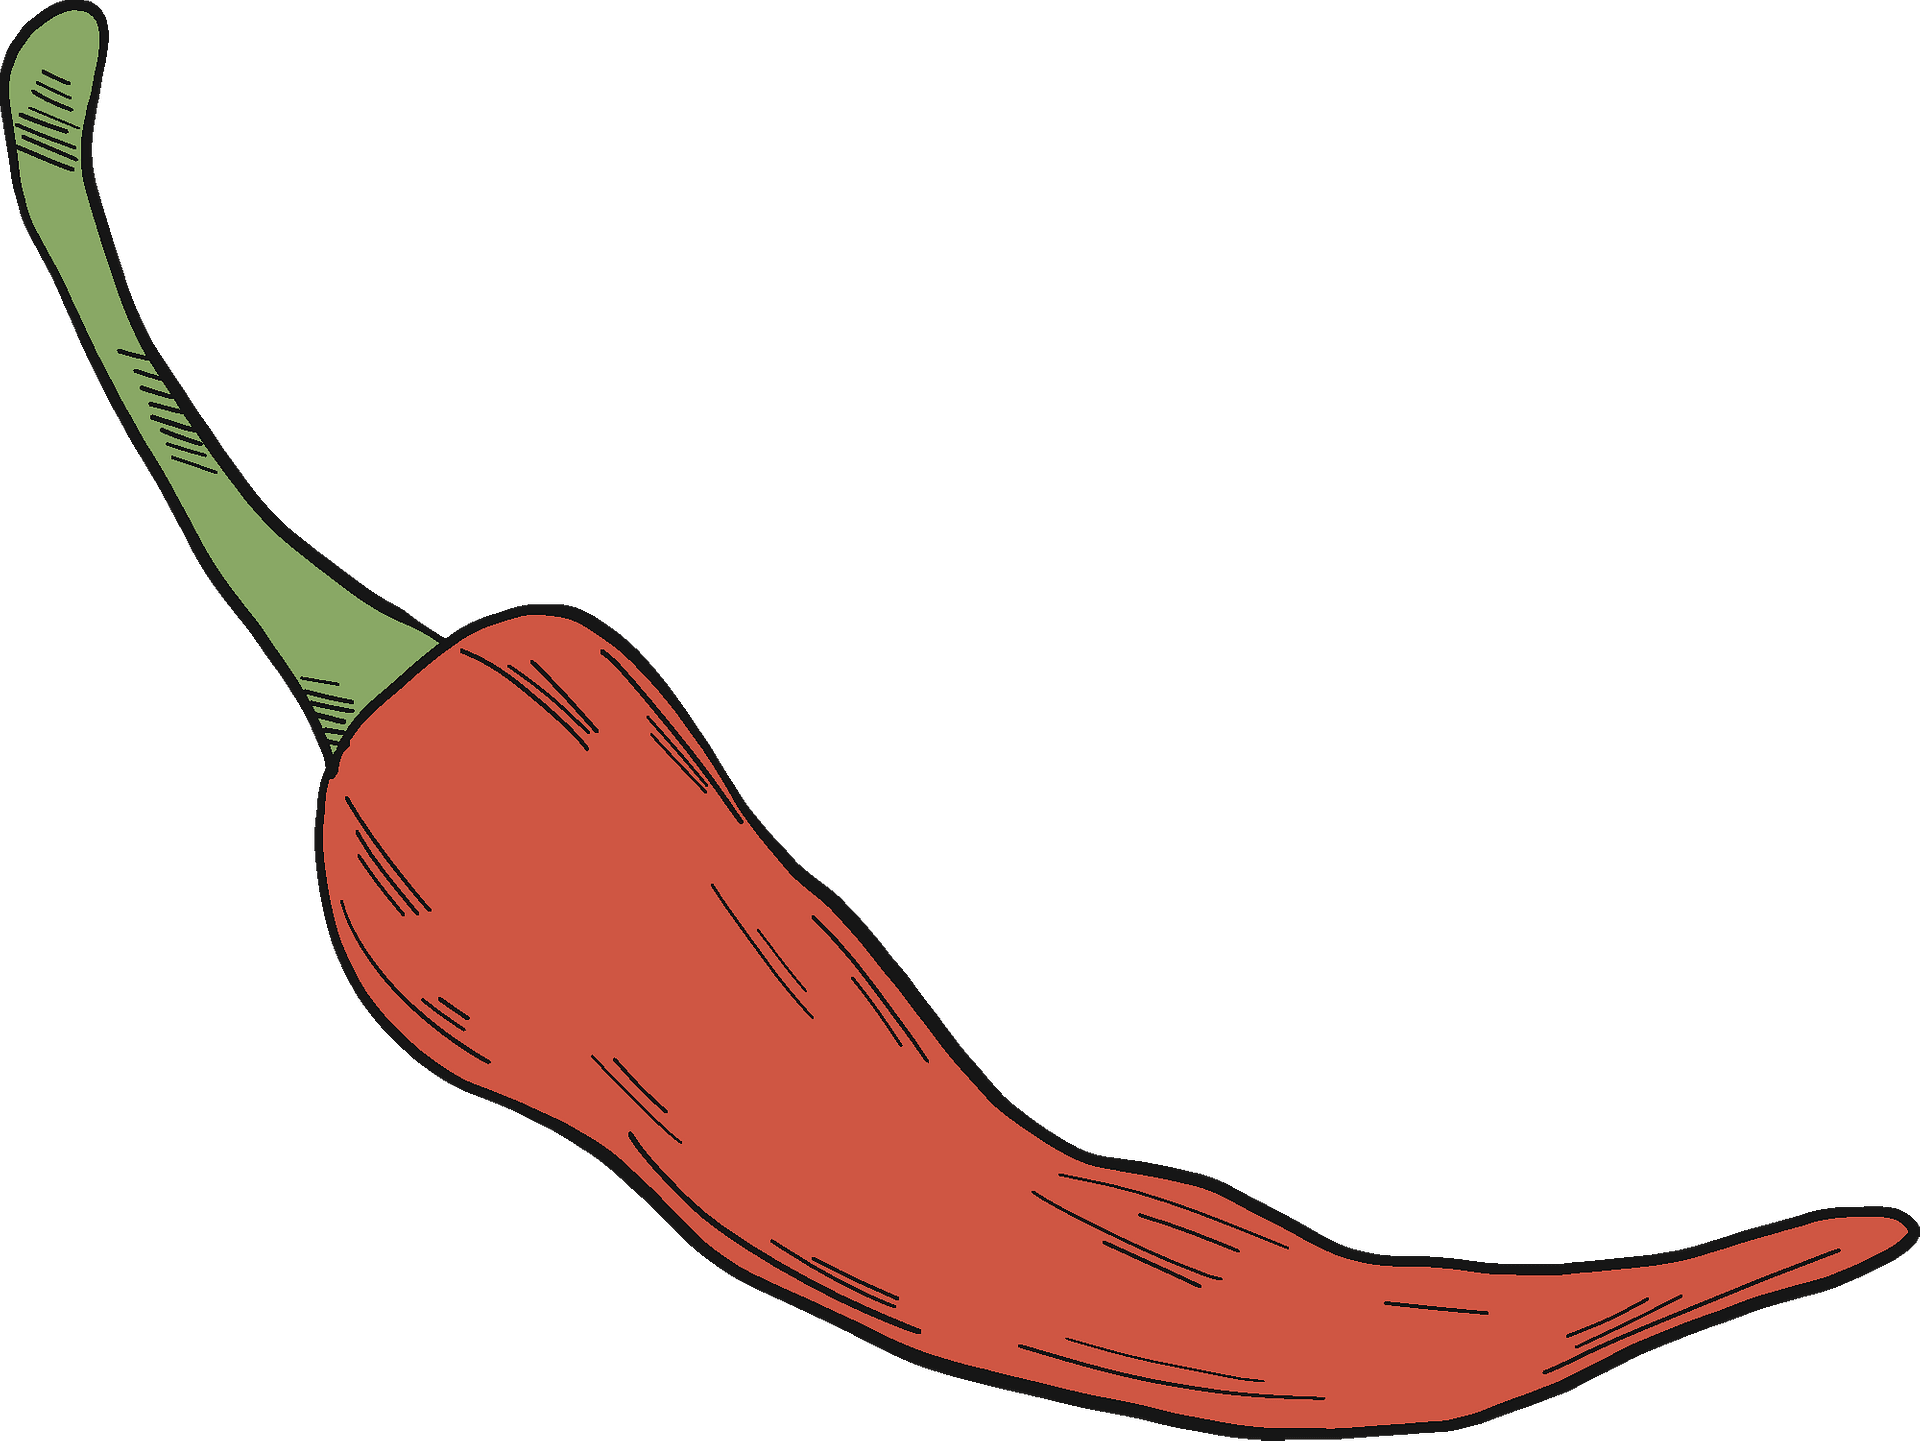 Chilli Pepper PNG Image